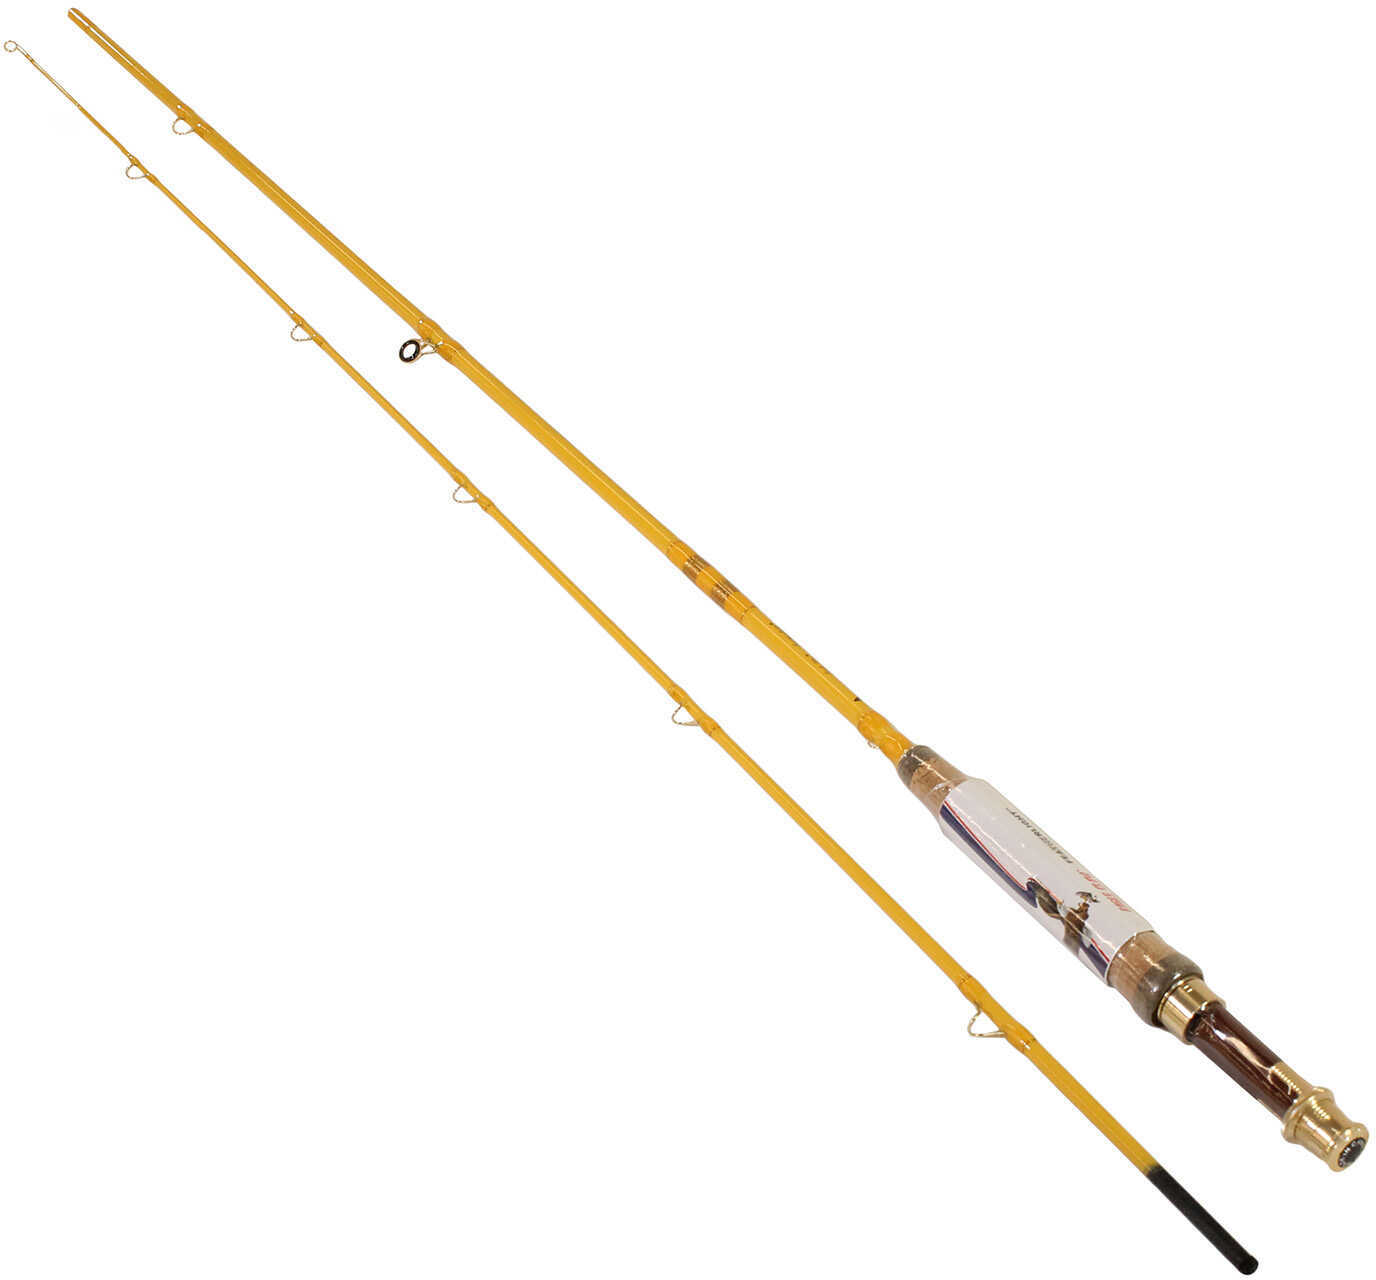 Eagle Claw Featherlight Rod Fly 8ft 5-6Wt 2Pc